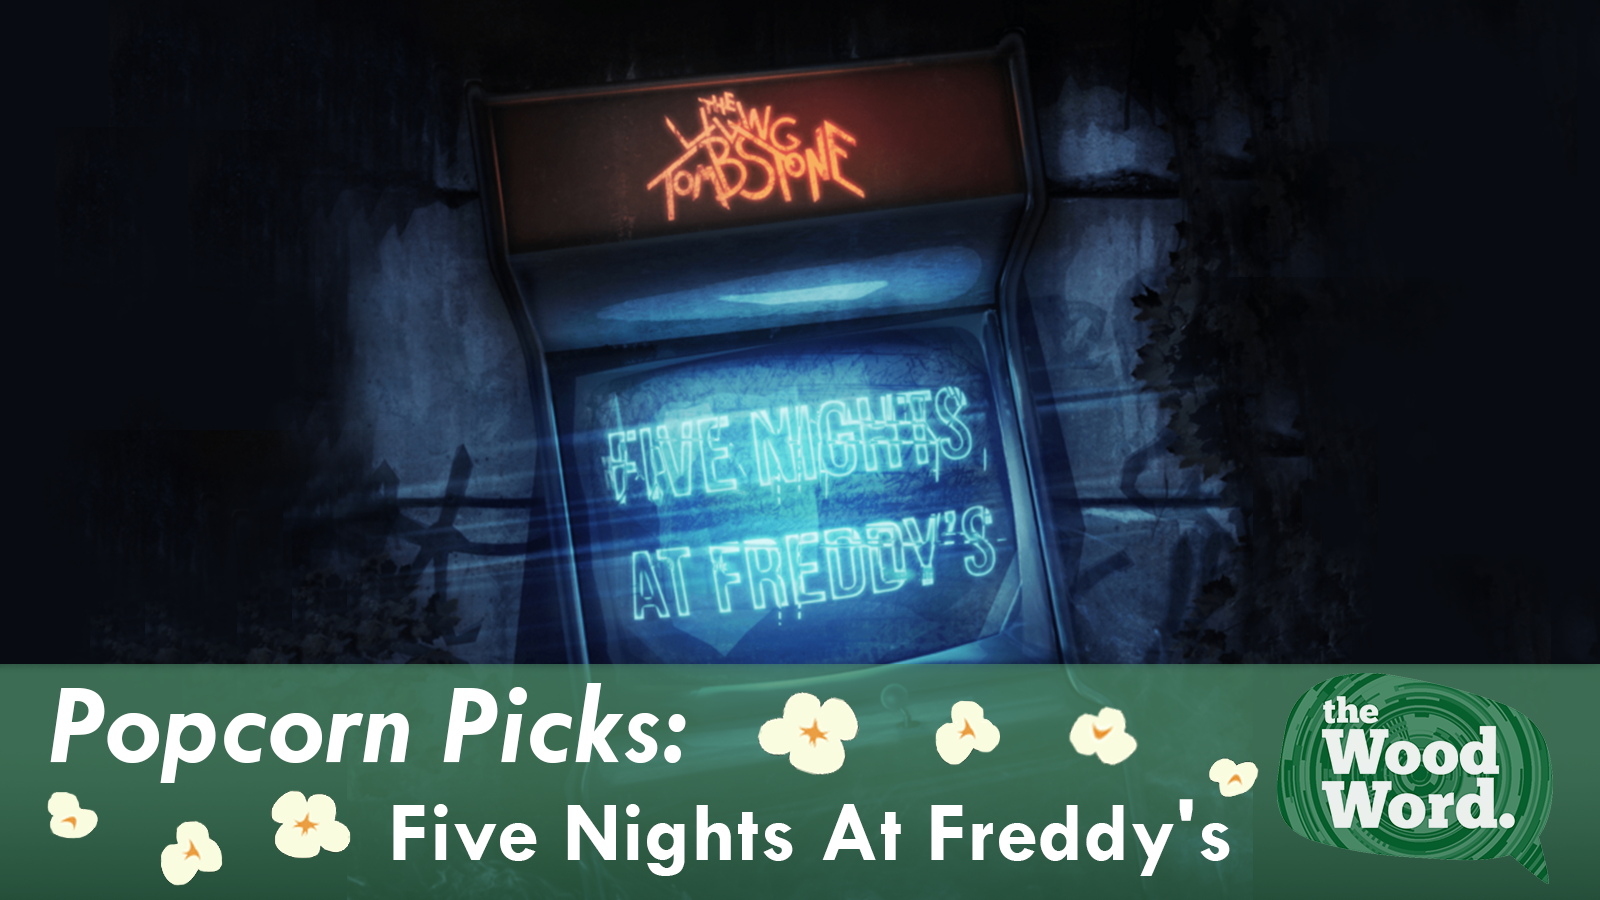 Is “Five Nights At Freddy’s” as bad as the critics say?